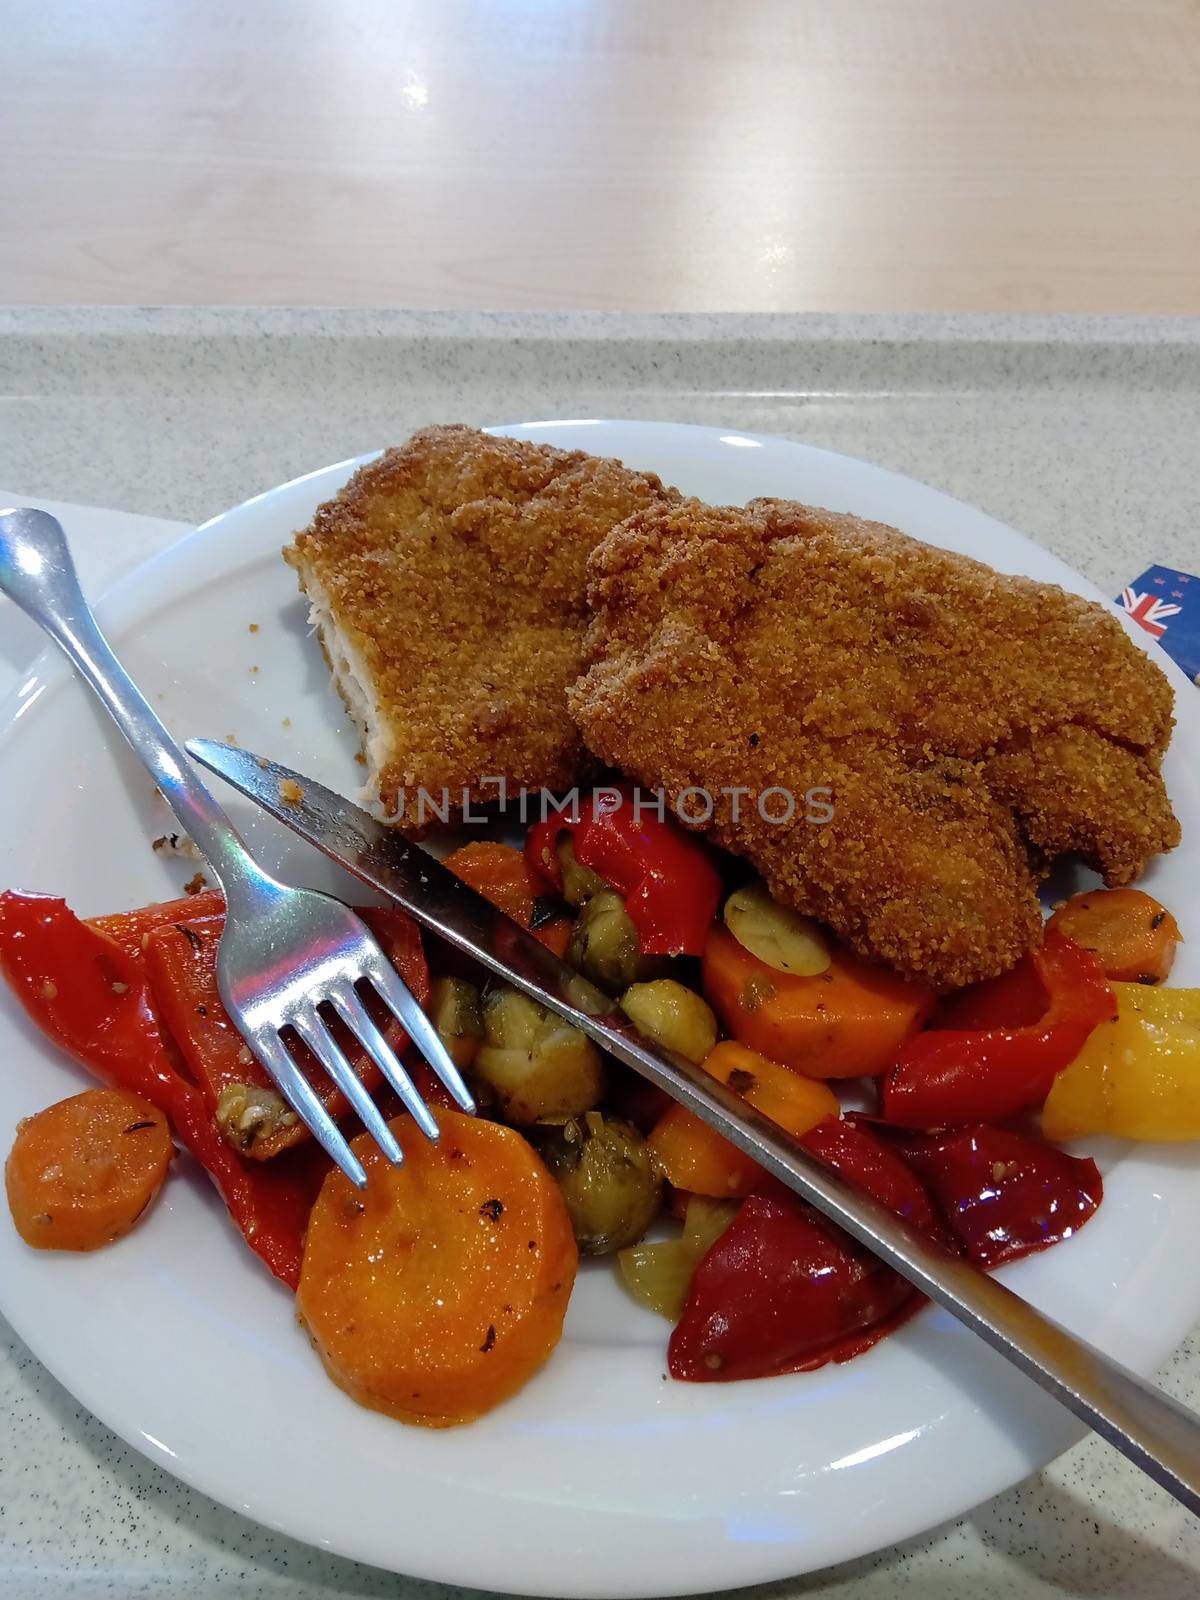 Fried turkey breast, served with grilled vegetables. High quality photo